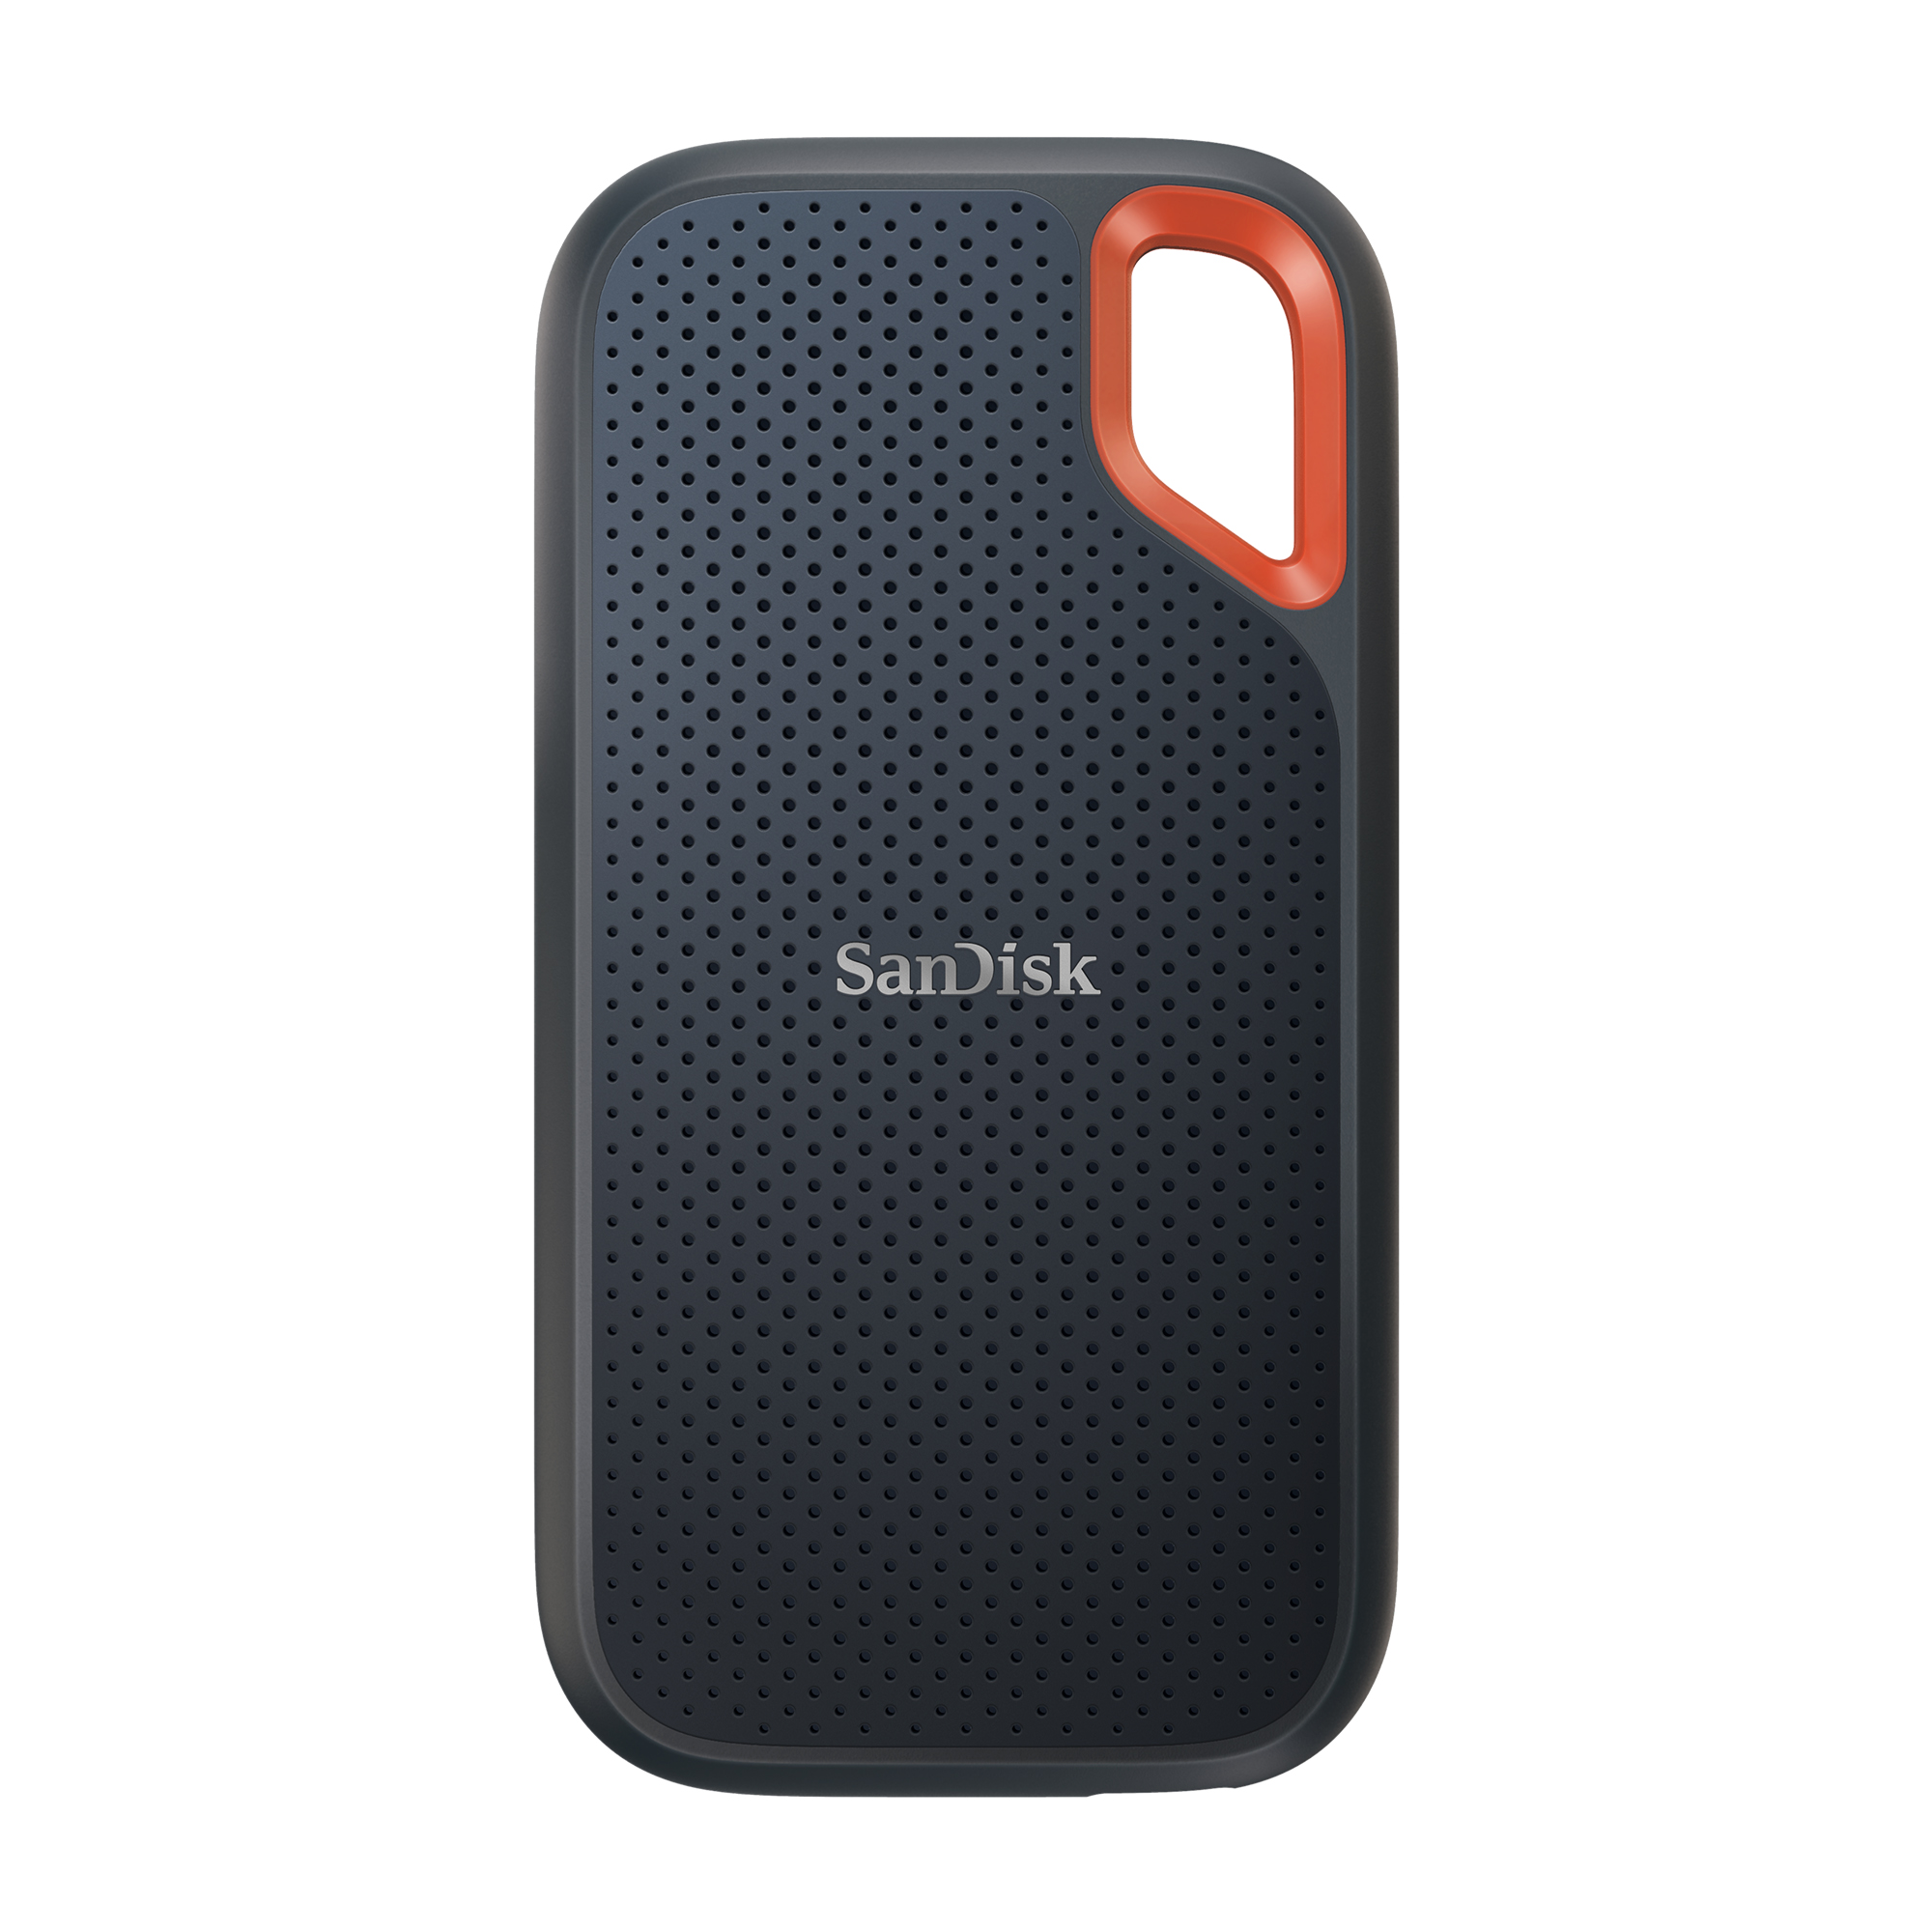 SanDisk 1TB Extreme External Portable SSD - Up to 1050MB/s - USB-C, USB 3.2 Gen 2 - SDSSDE61-1T00-AW25 - image 1 of 7